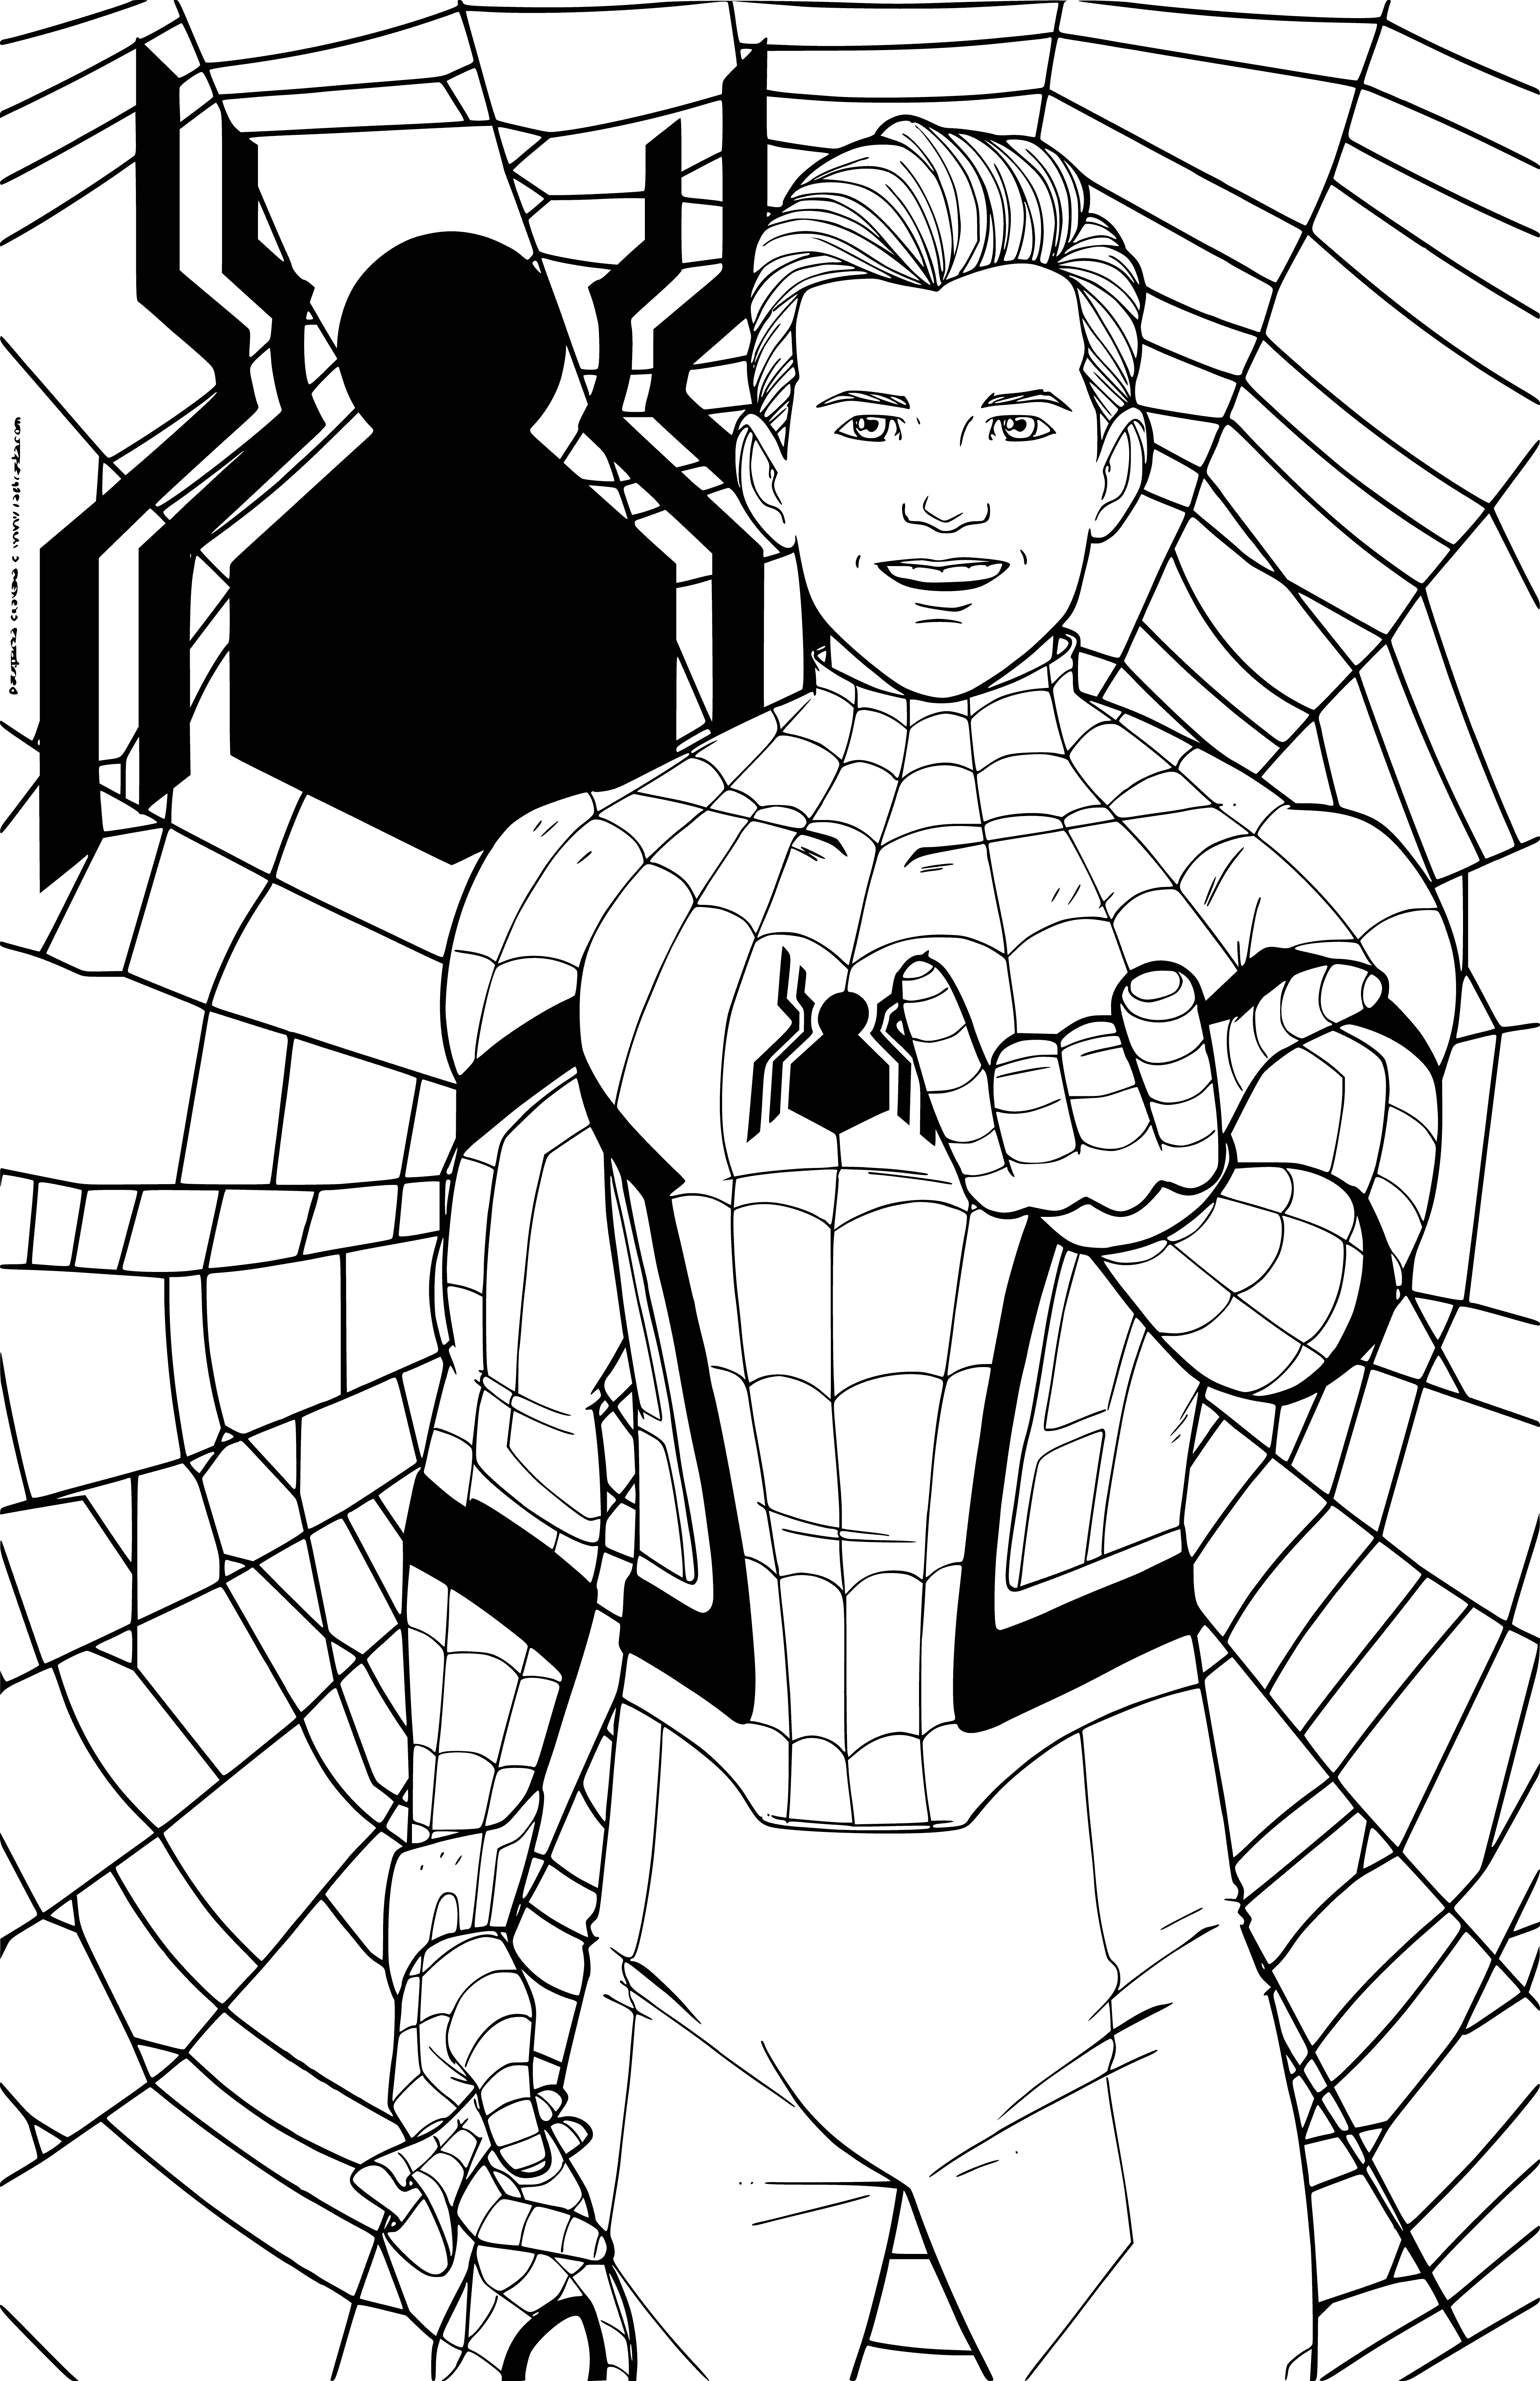 coloring page: Spiderman overviews the city in the night, holding a large spider and spider spray. His red-blue costume and webbed cape flutter in the wind.